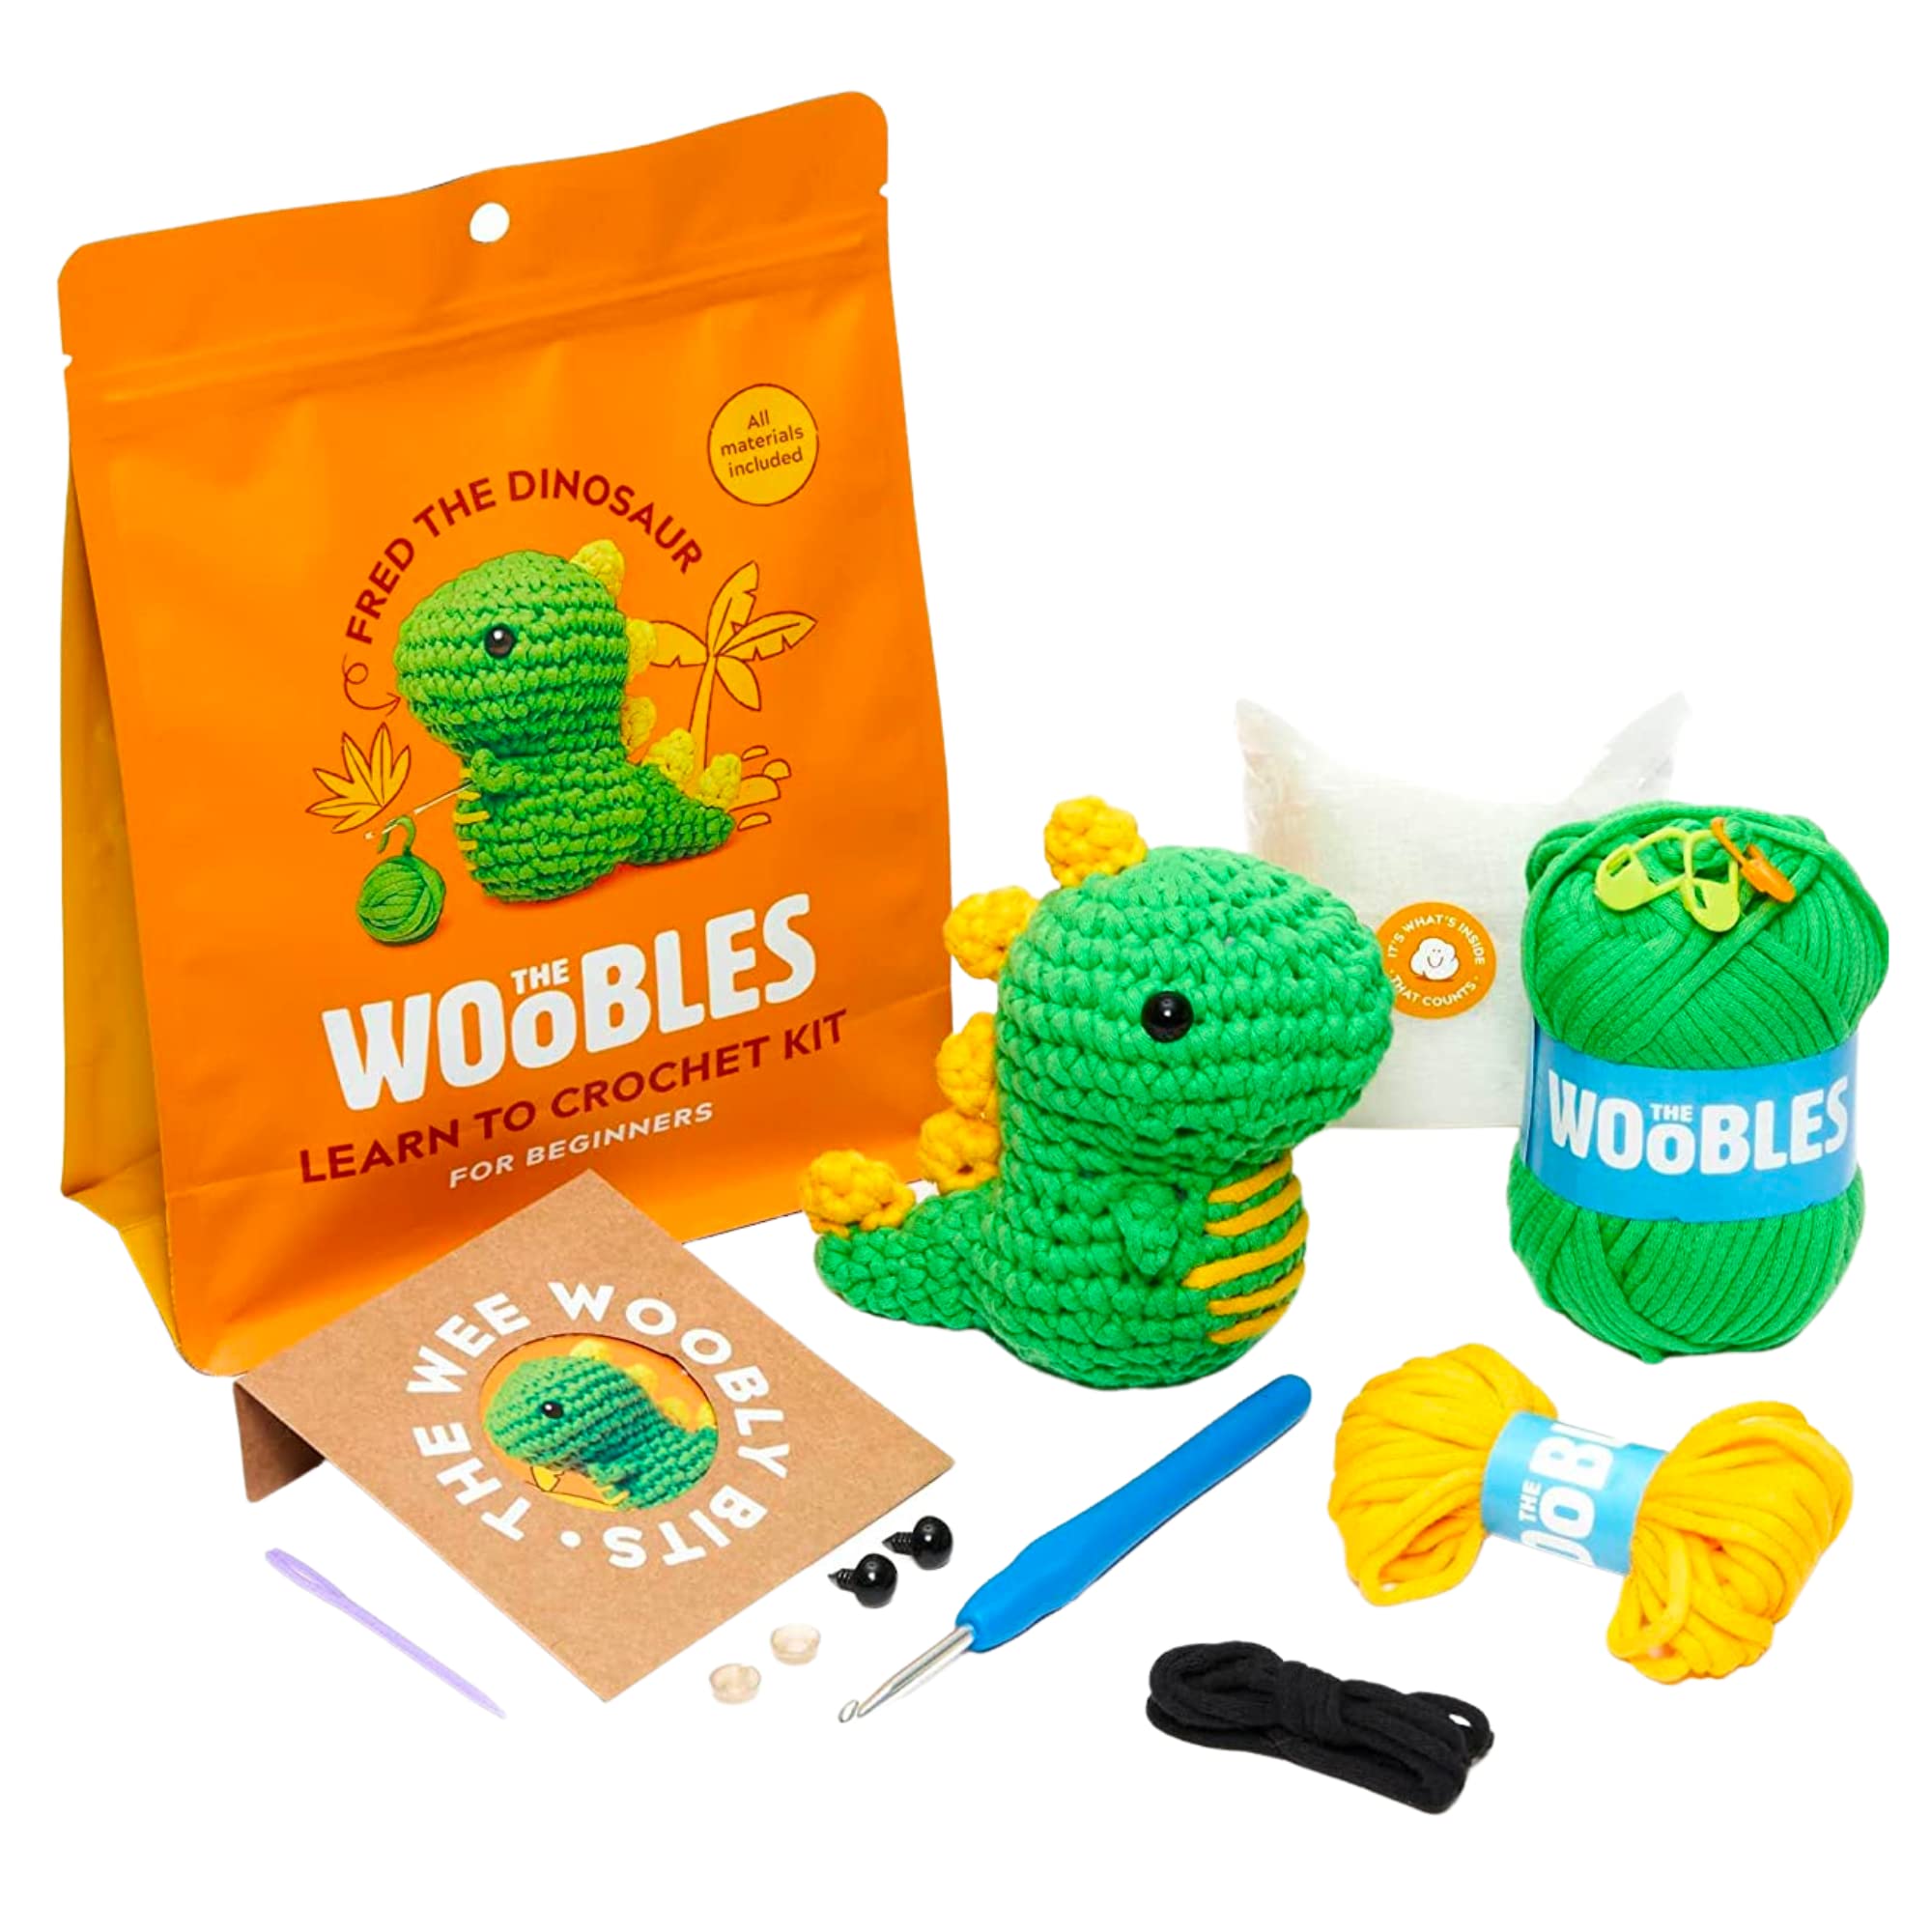 Woobles Crochet: We Tried This Beginner-Friendly Craft Kit